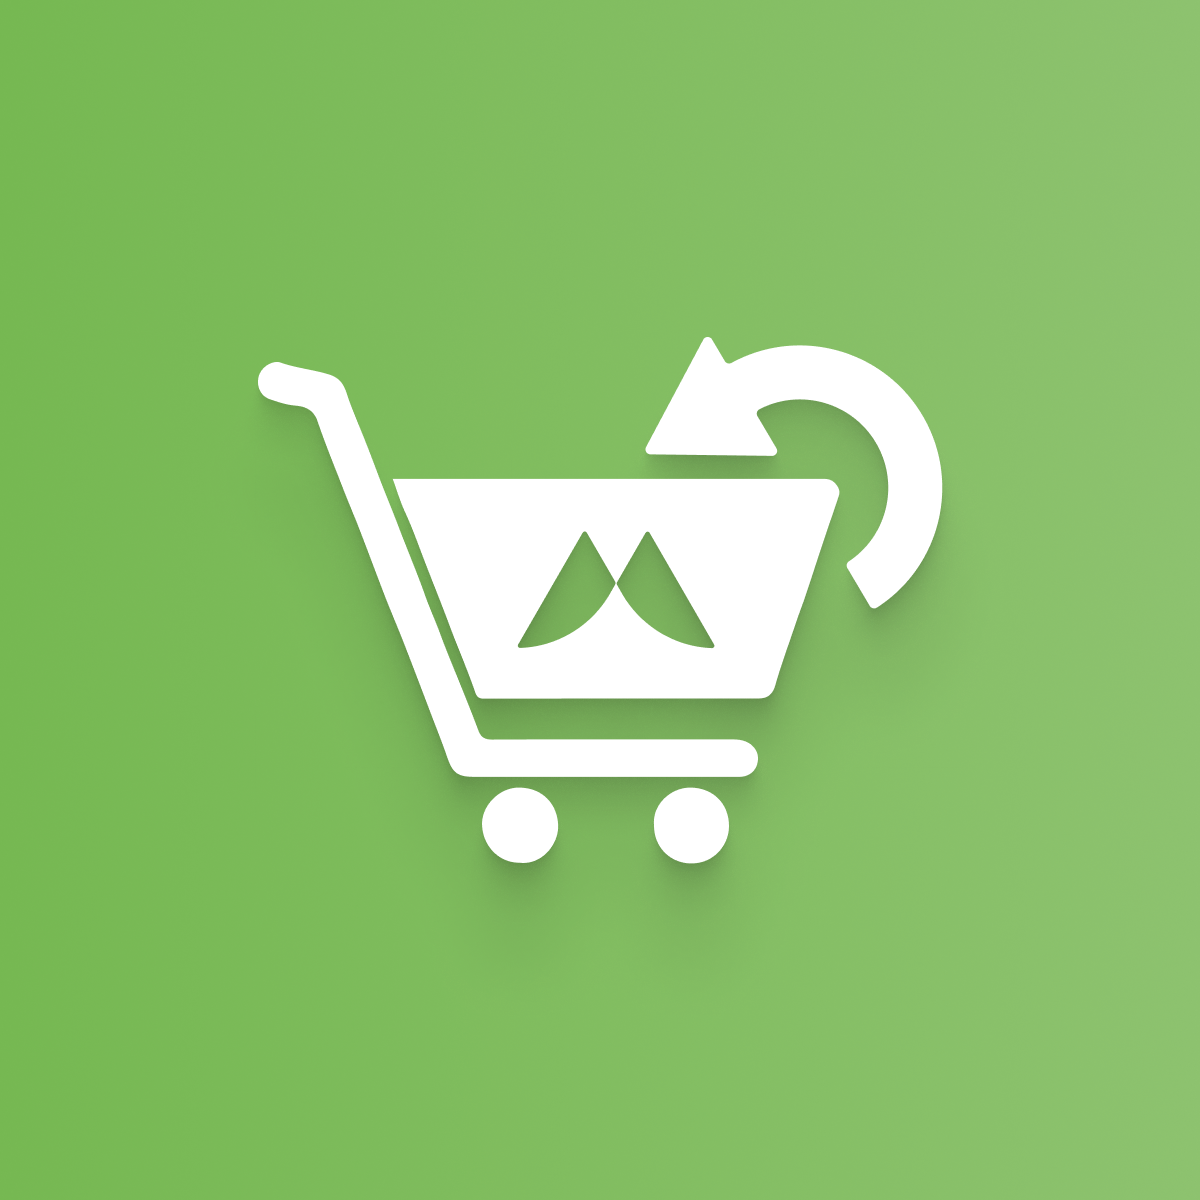 Hire Shopify Experts to integrate Maxify ‑ Pre Order app into a Shopify store